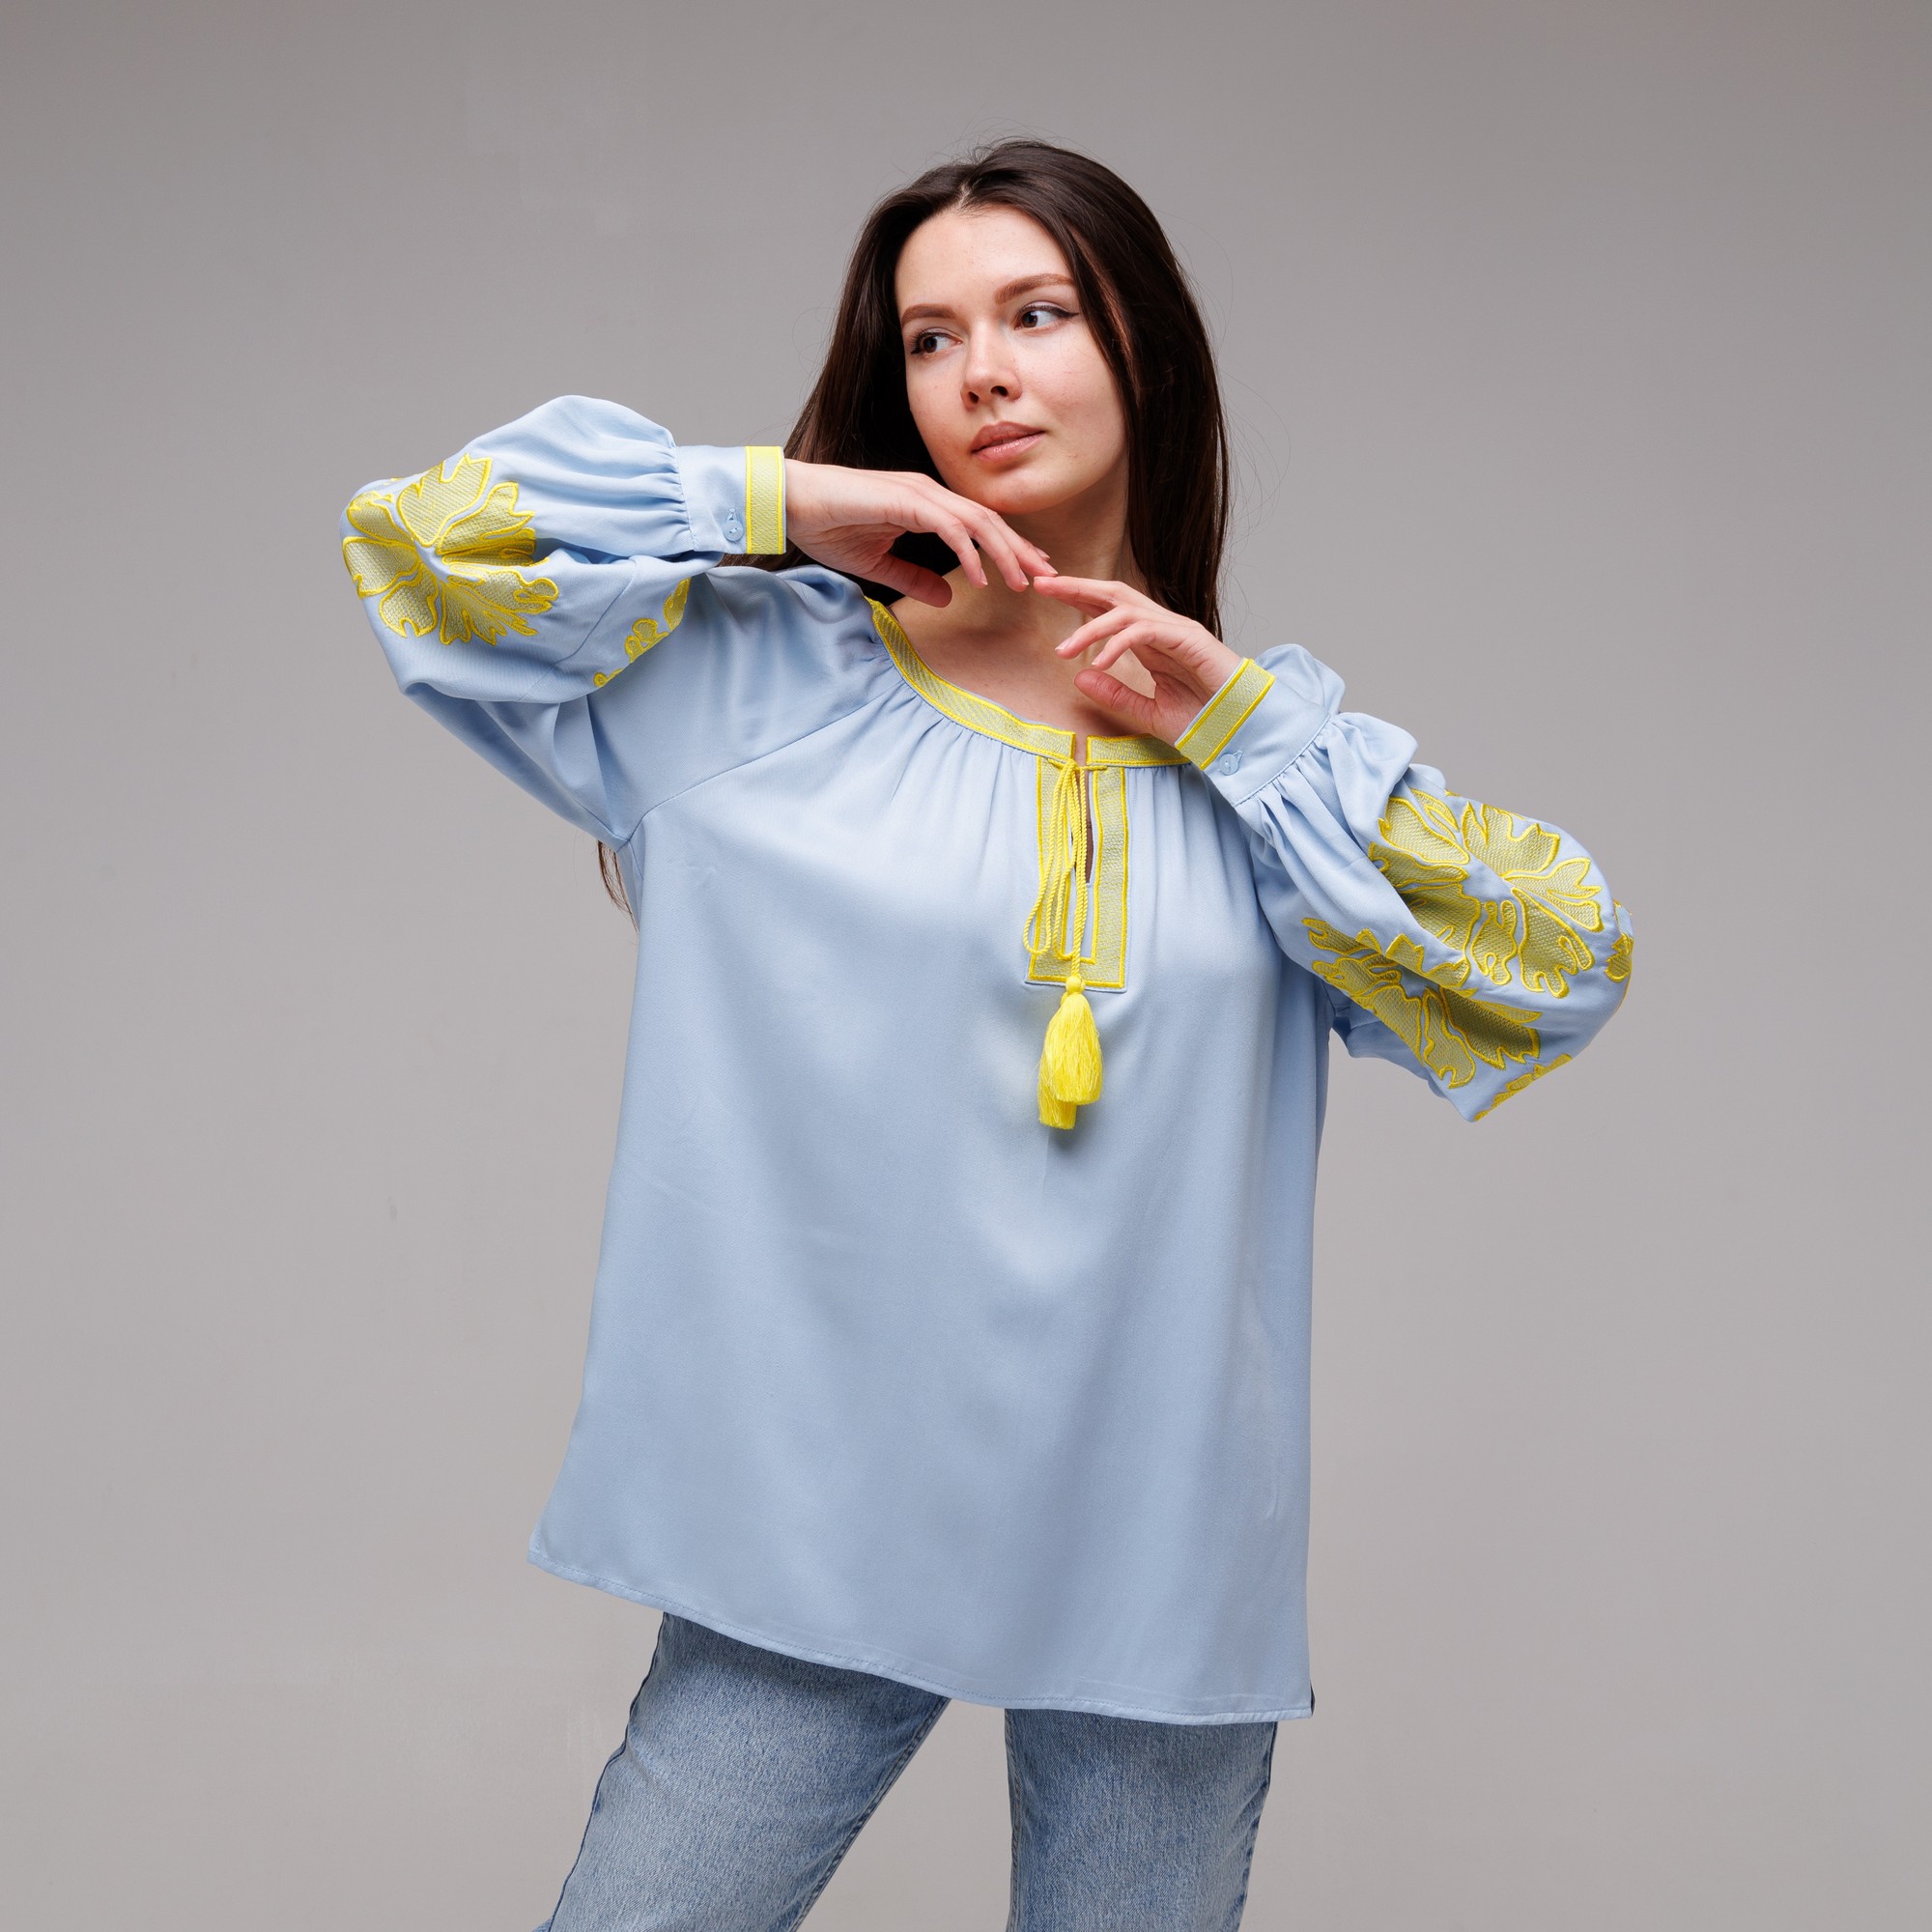 Women's embroidered blouse "Victory" blue-yellow